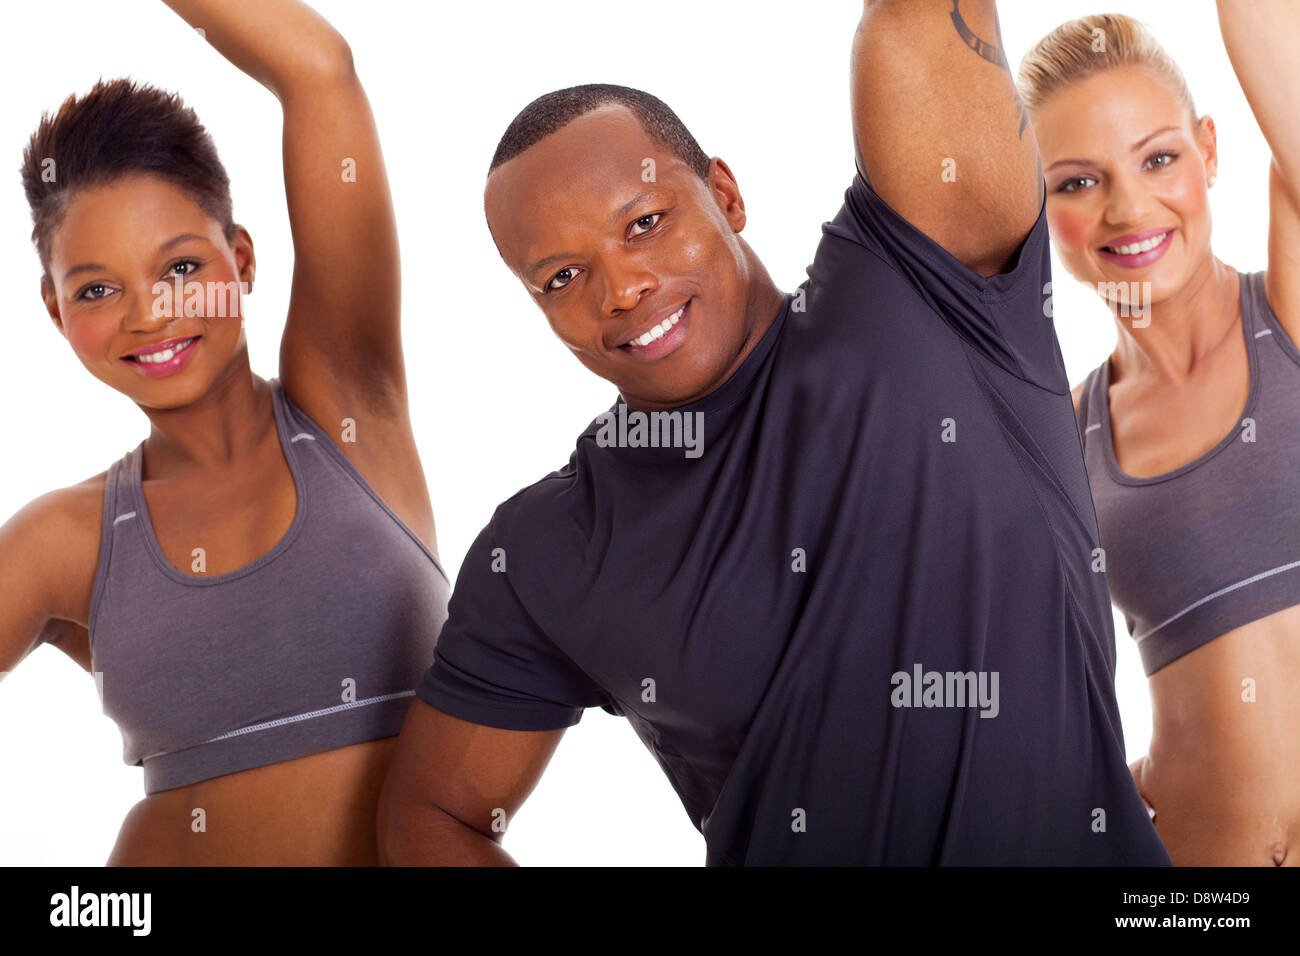 healthy group stretching arms isolated on white background Stock Photo